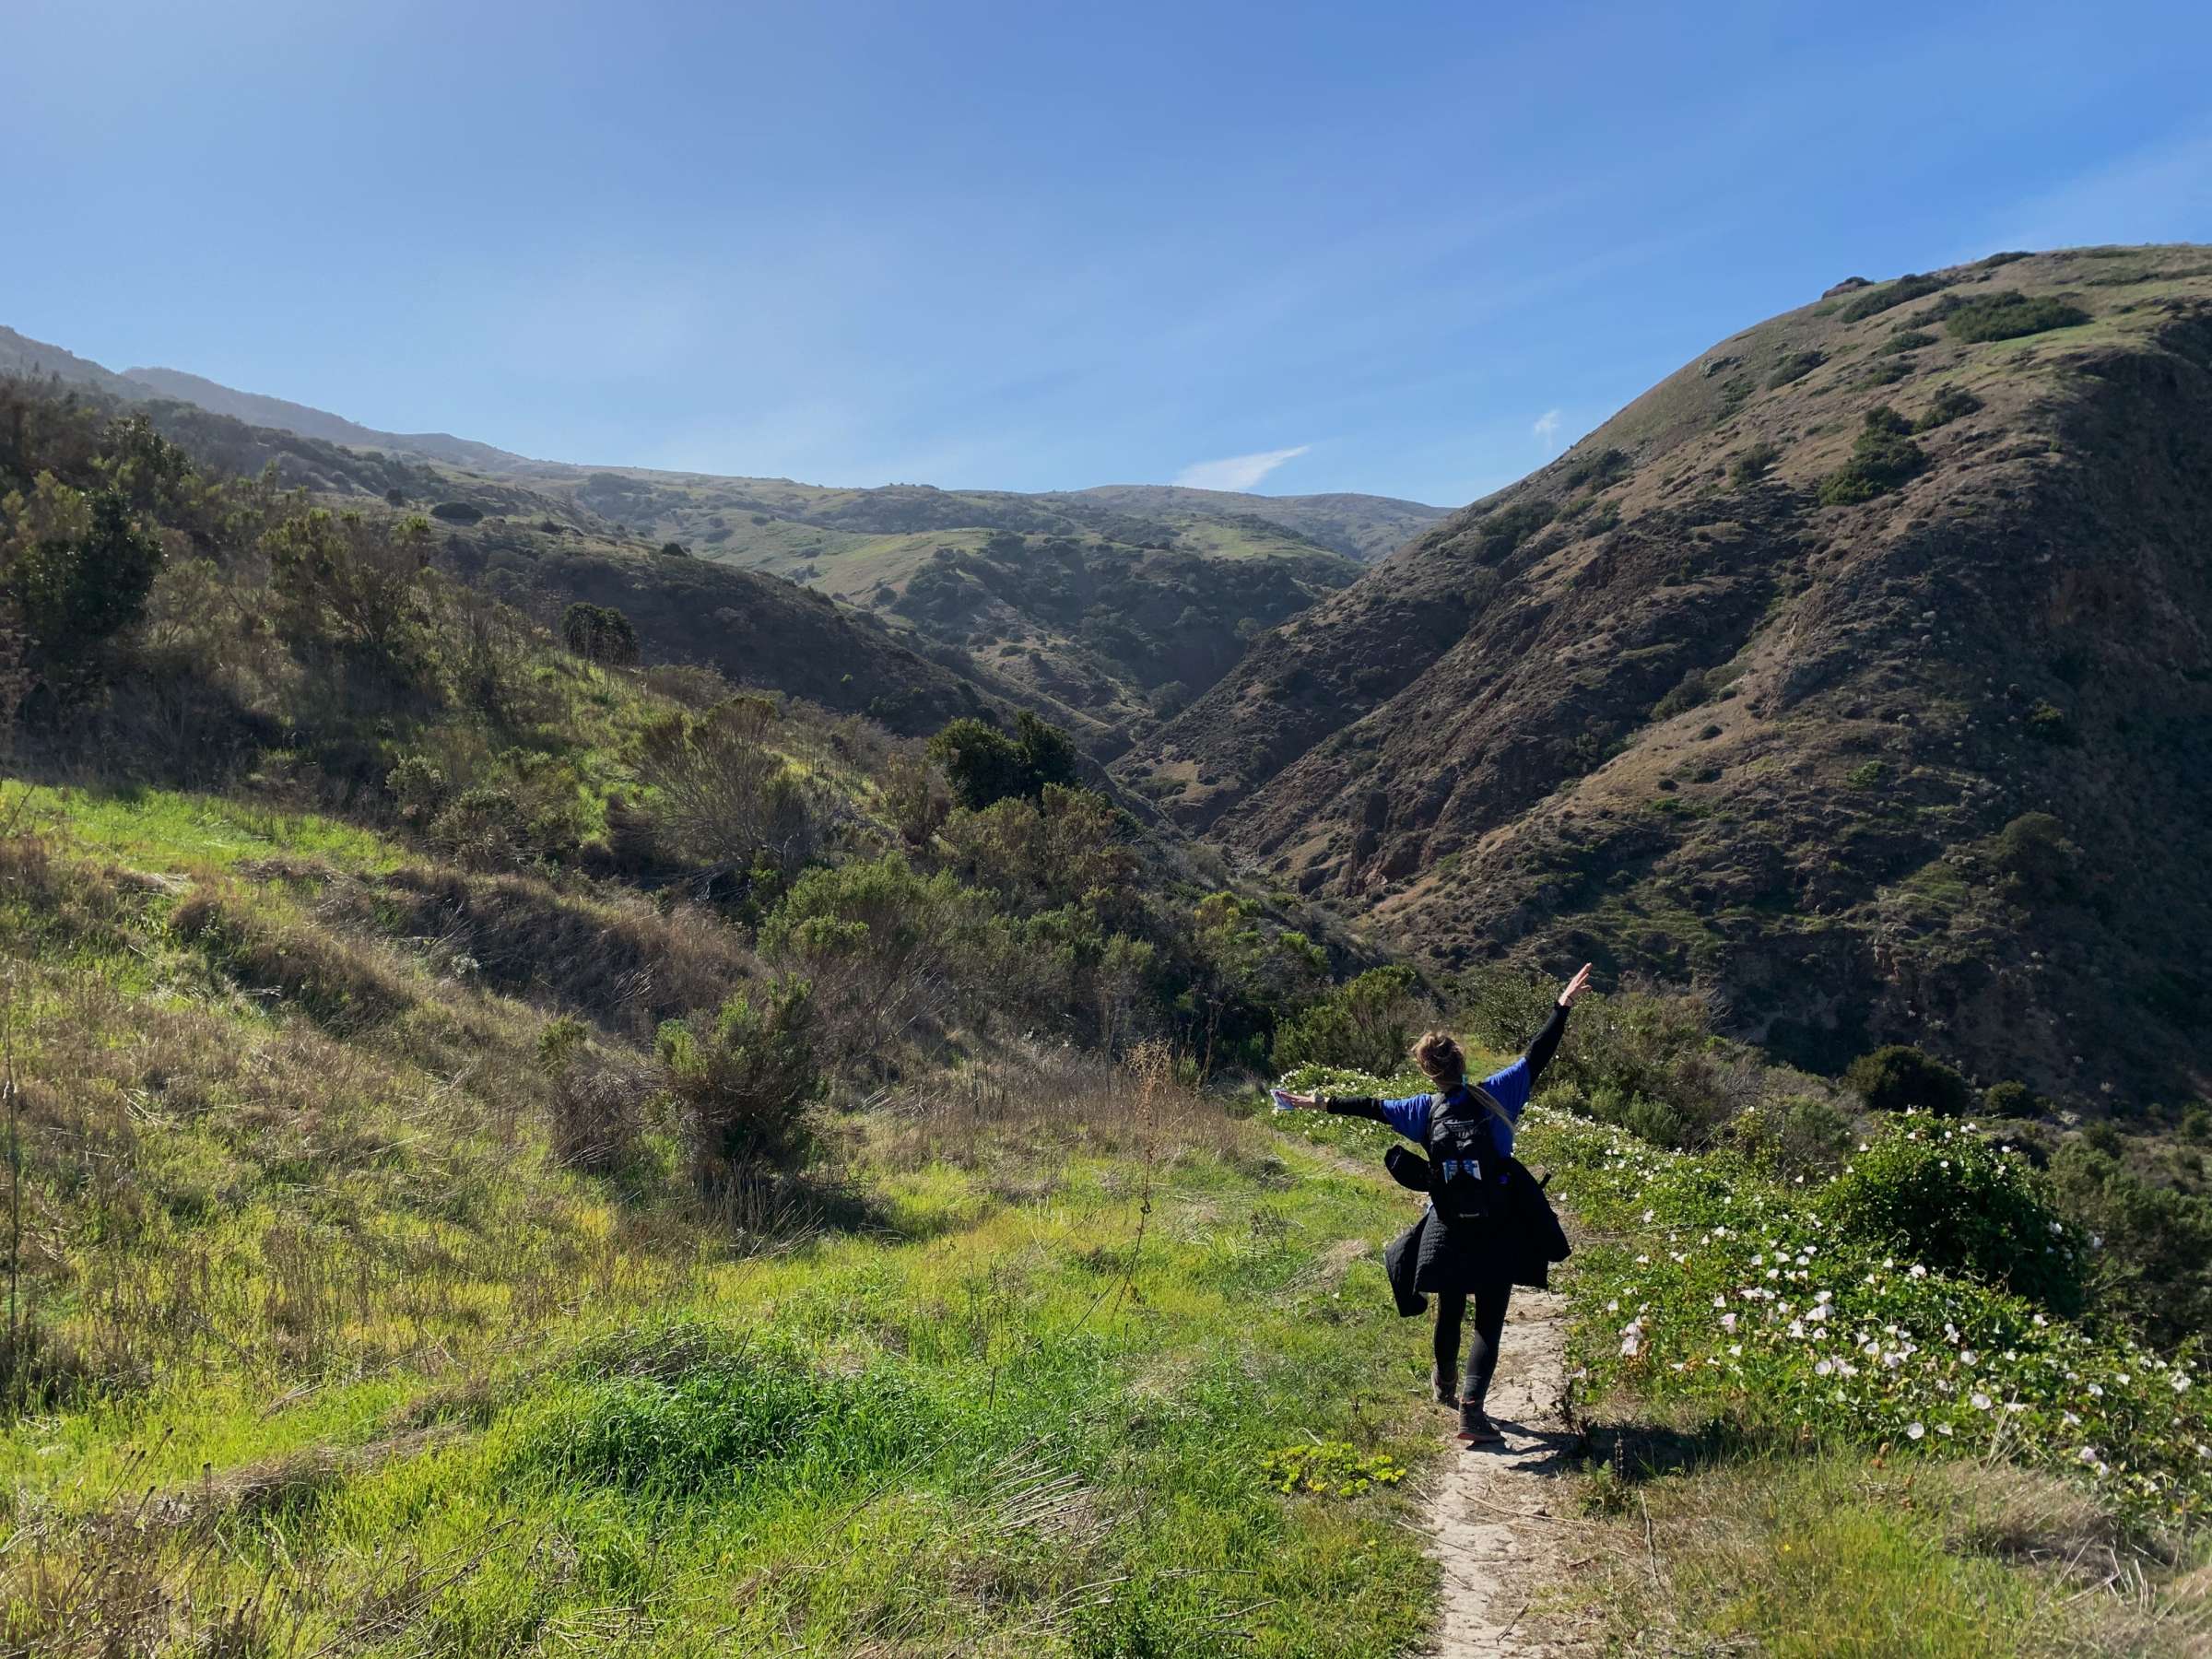 Image shows a student posing along a lush hiking trail